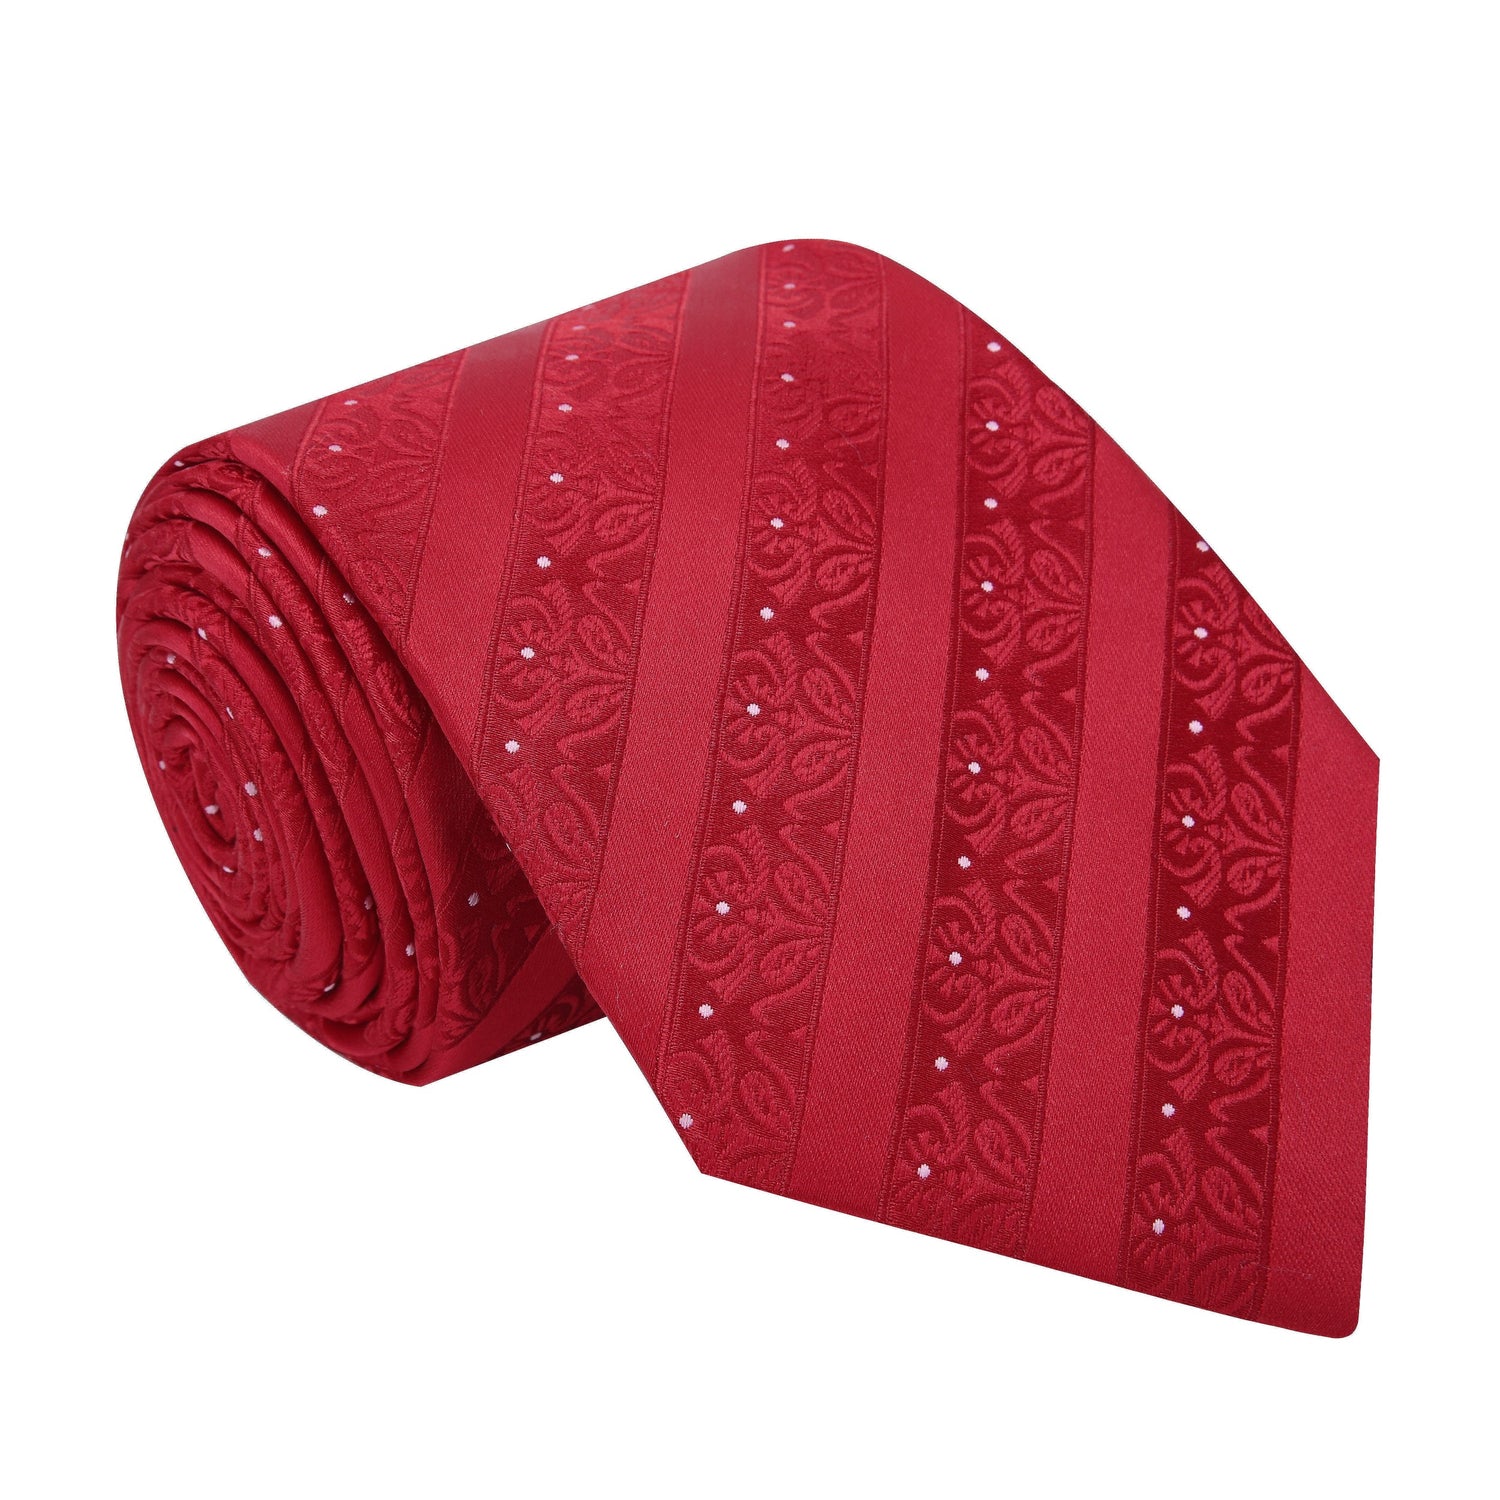 Single Tie: Sparkling Red Detailed Floral Tie 